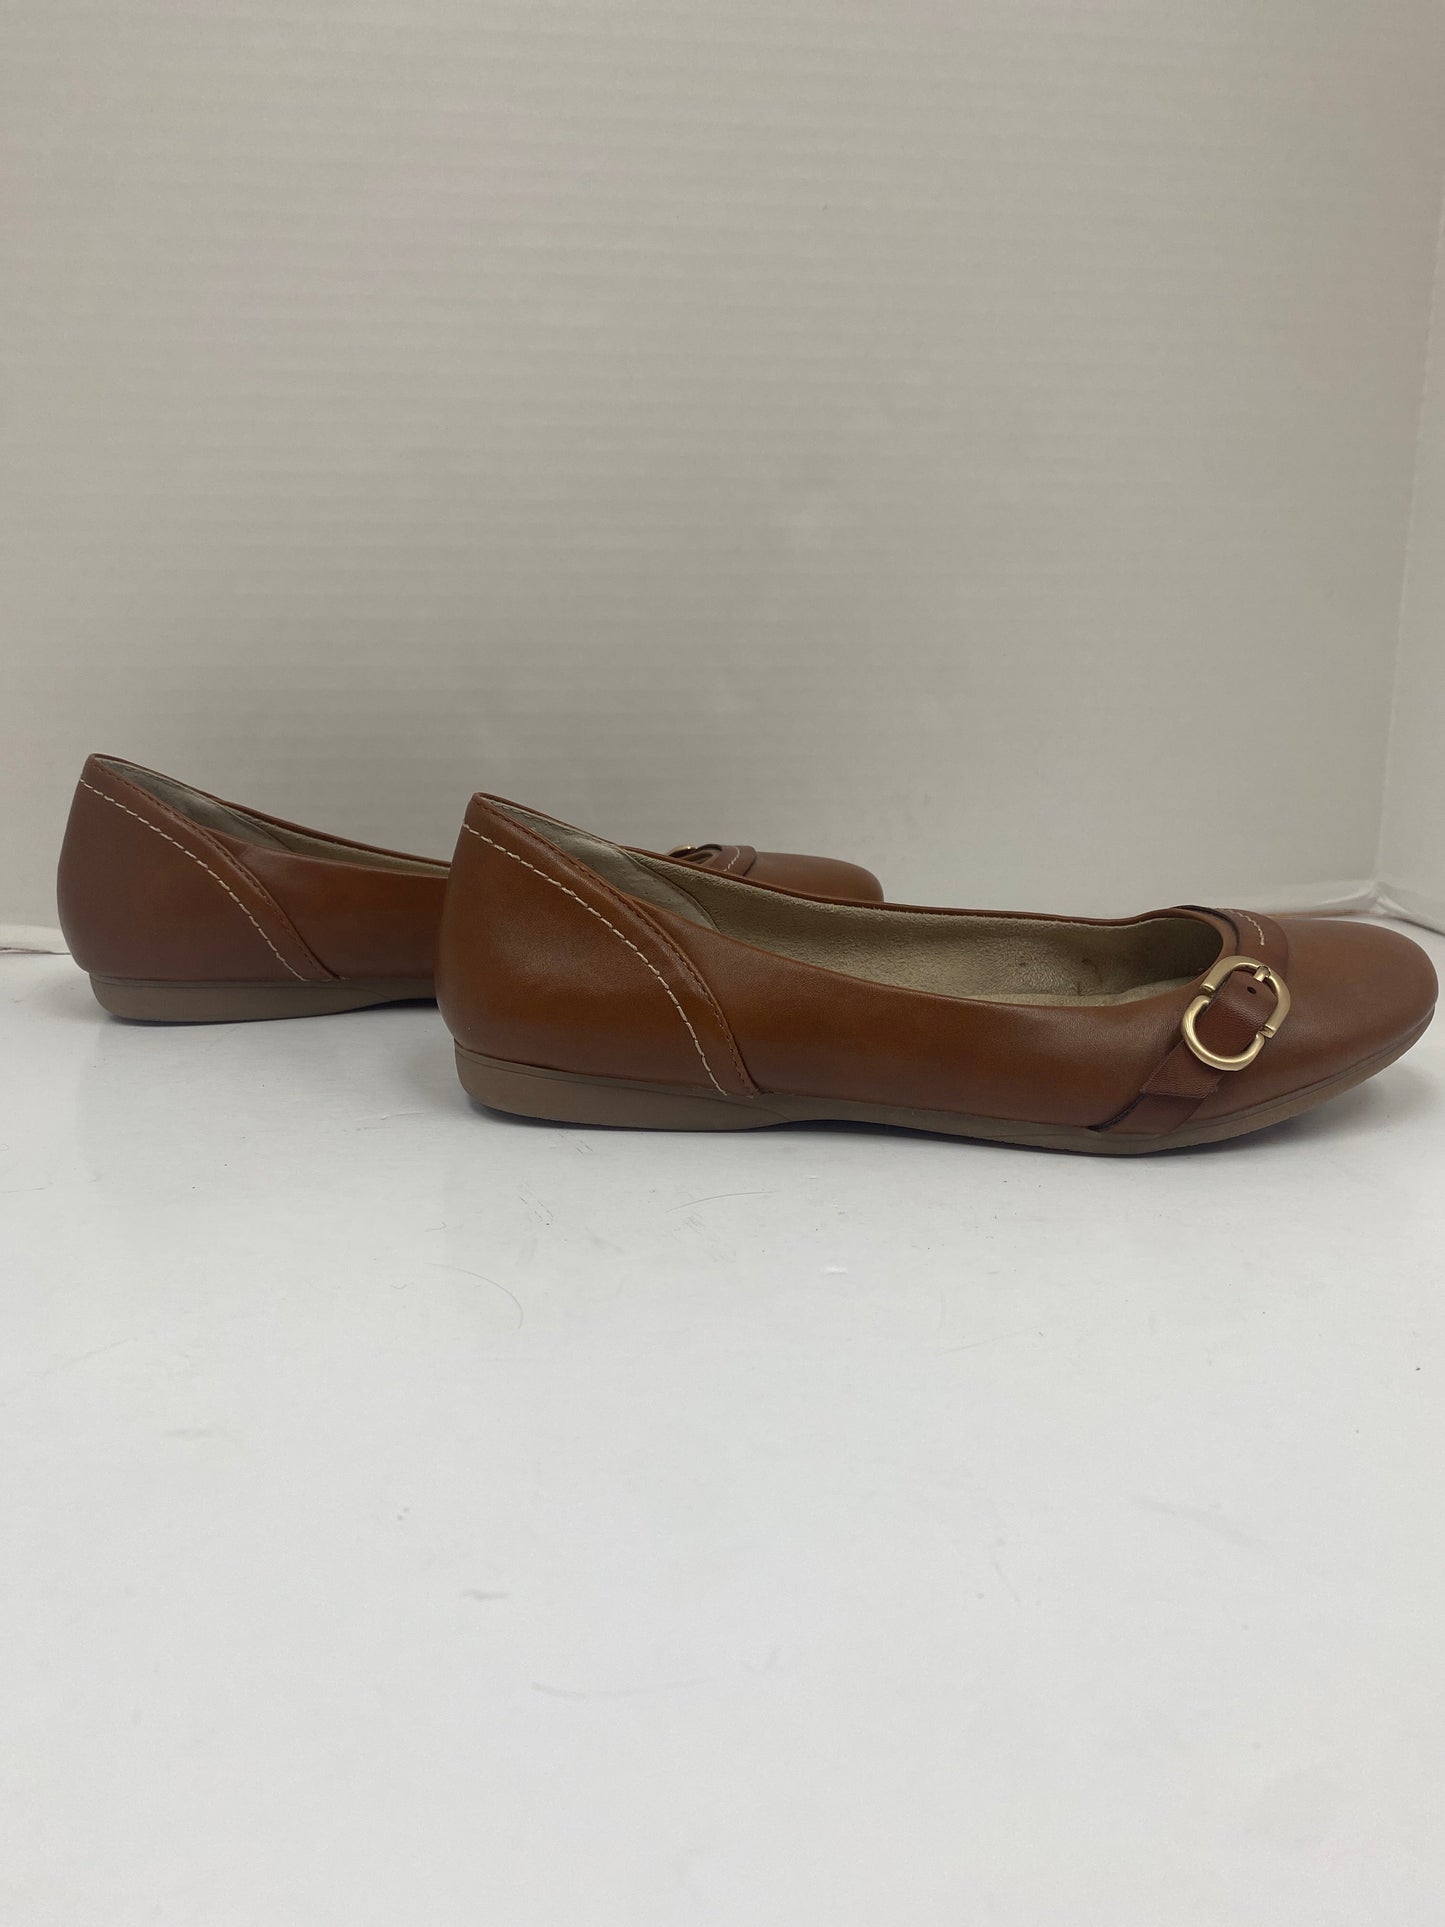 Brown Shoes Flats Bass, Size 8